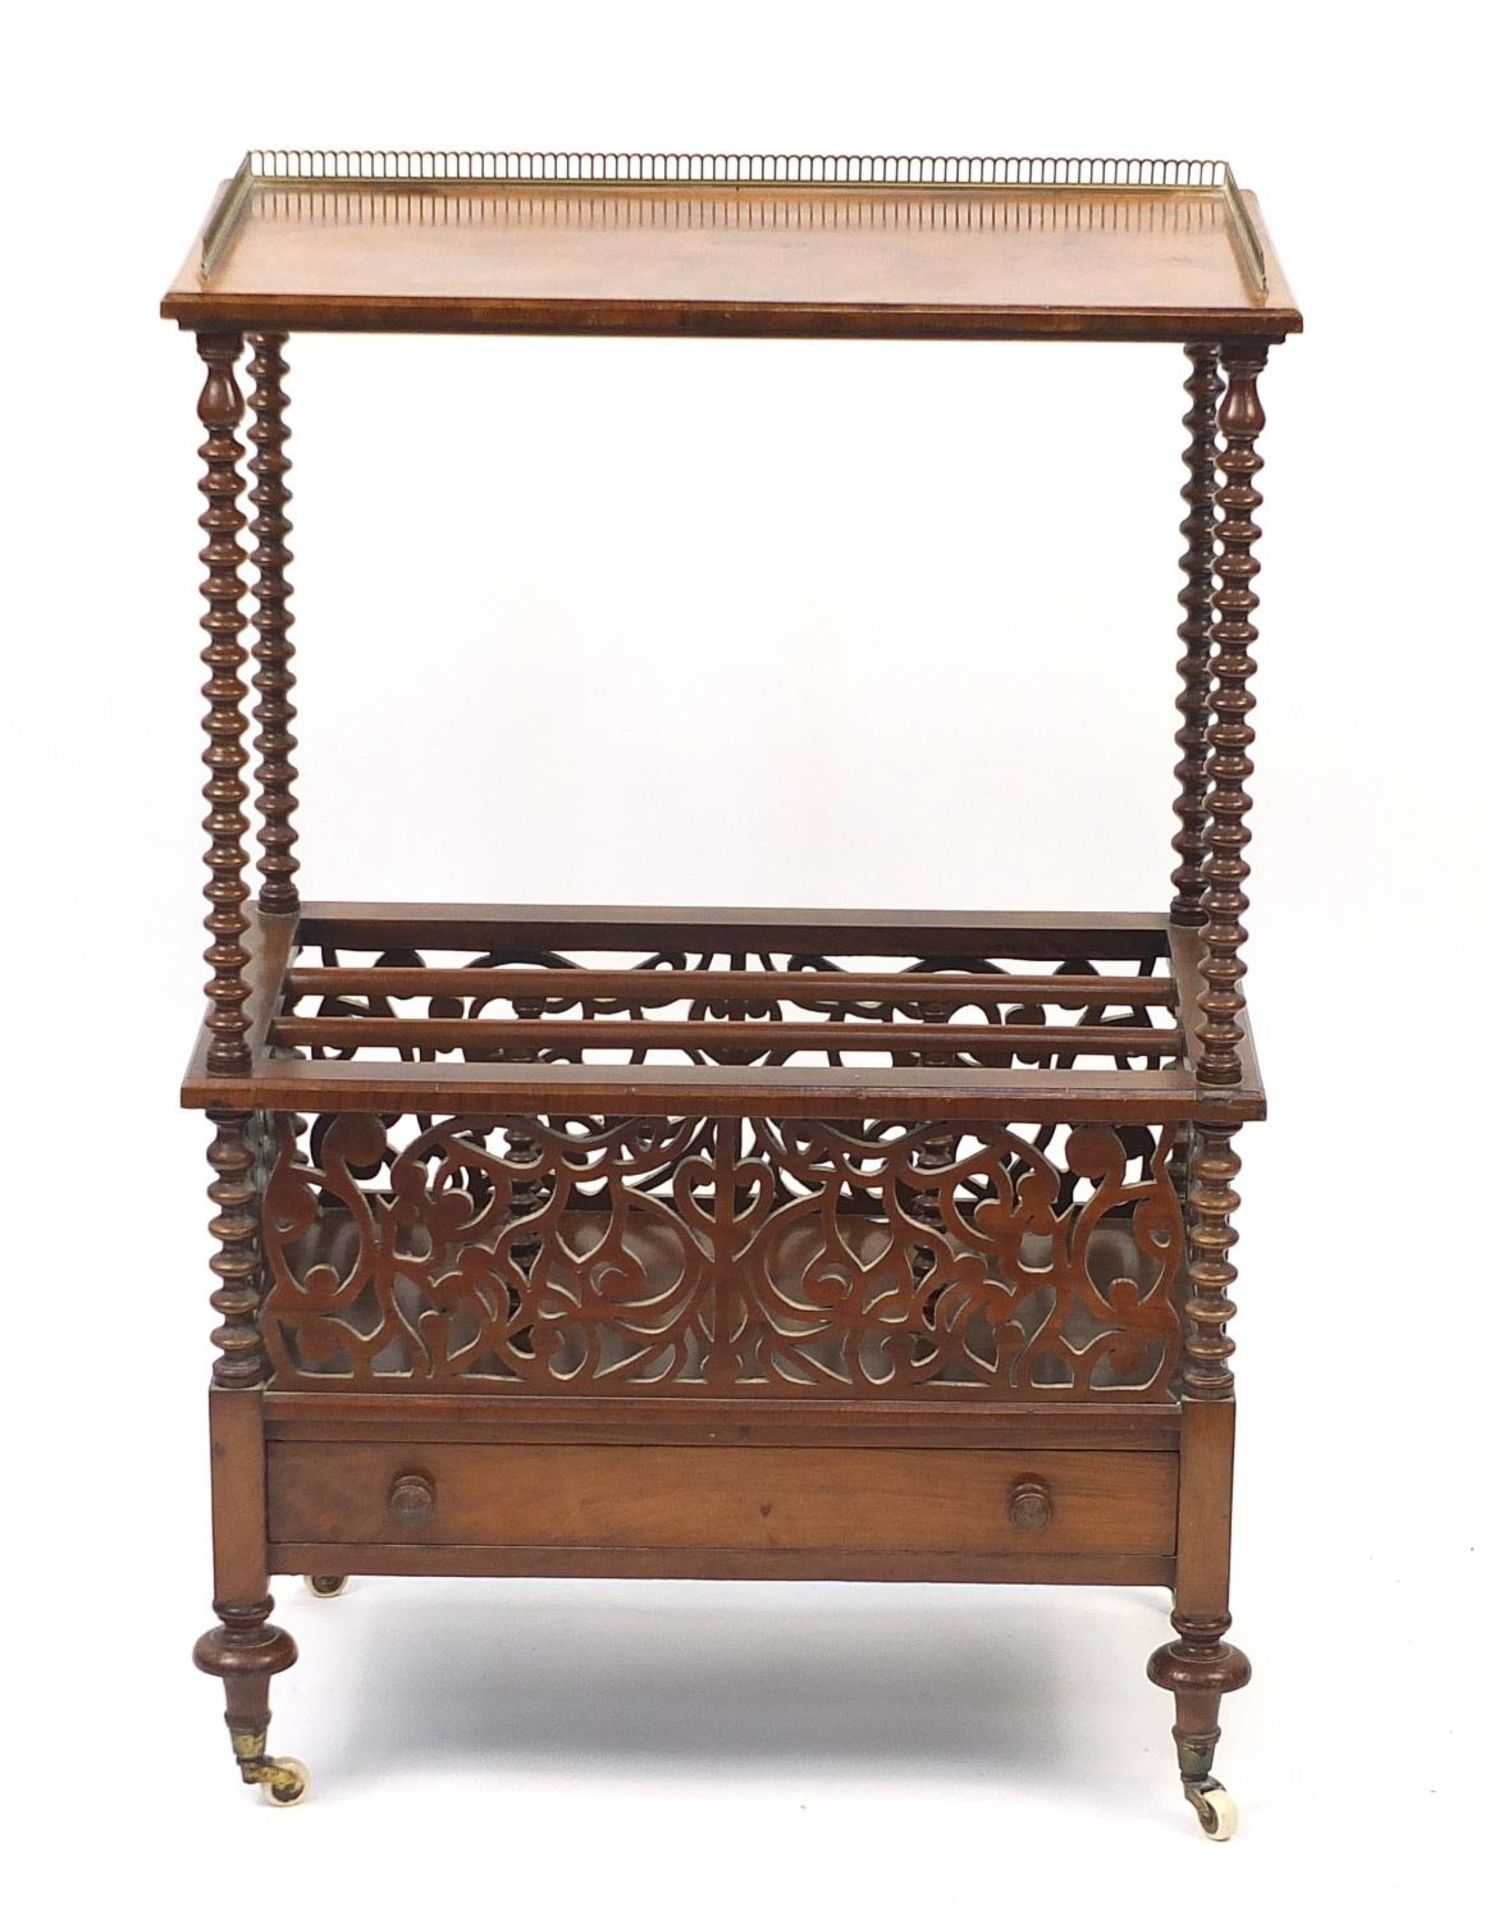 Victorian burr walnut Canterbury with brass gallery and drawer to the base, 100cm H x 67cm W x - Image 2 of 5